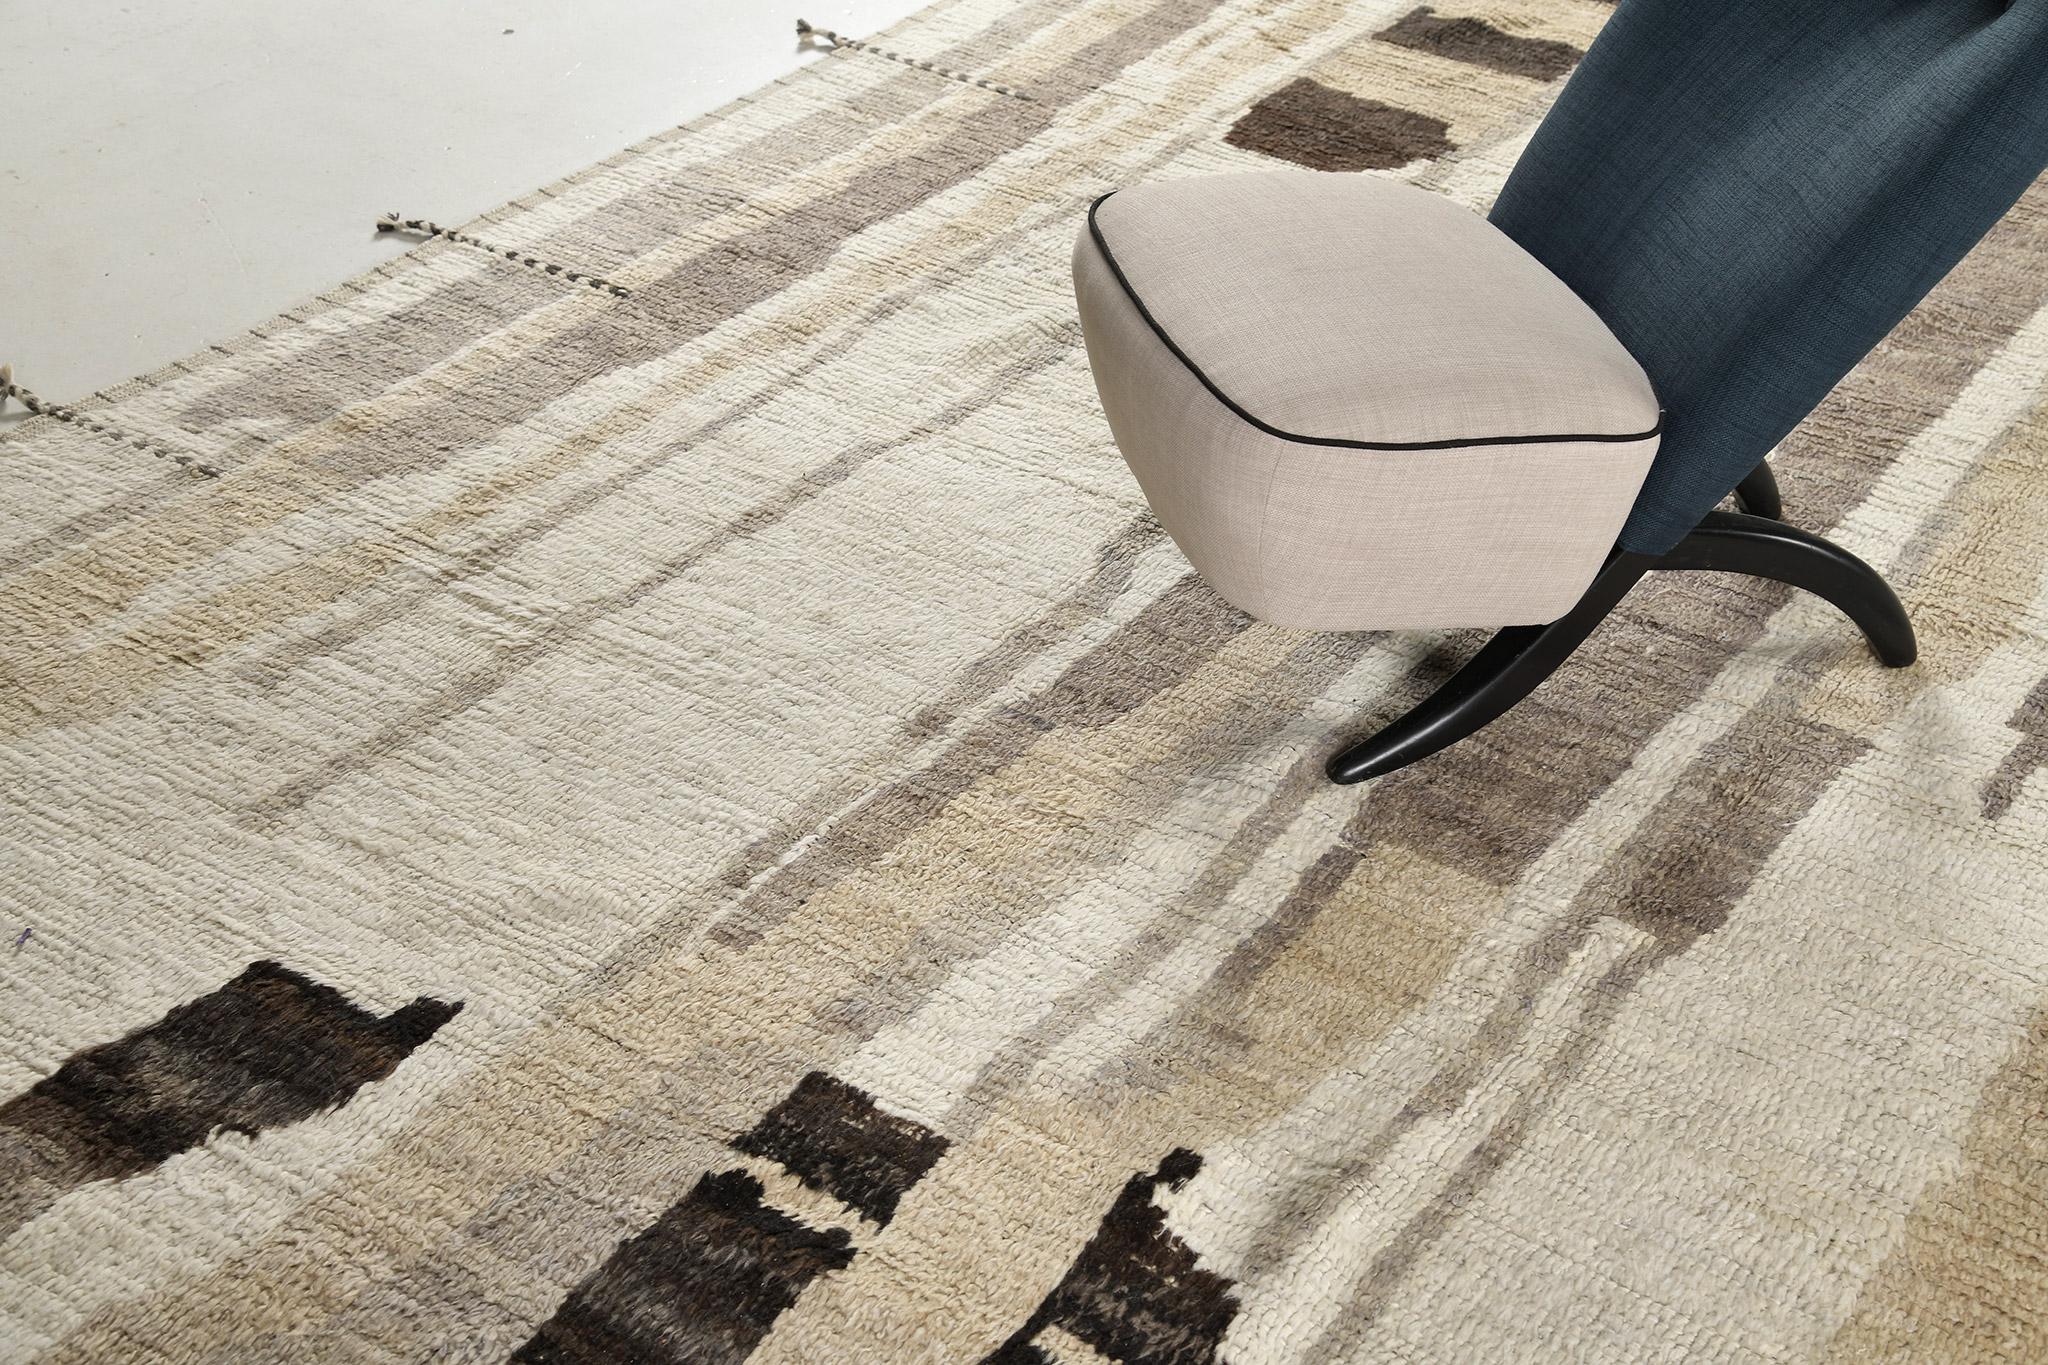 Talassemtane is made of a beautiful wool pile weave in neutral colors and abstract design elements. It's weaving of irregular shapes and patterns is what makes the Atlas collection so unique and sought after. Mehraban's Atlas collection is noted for